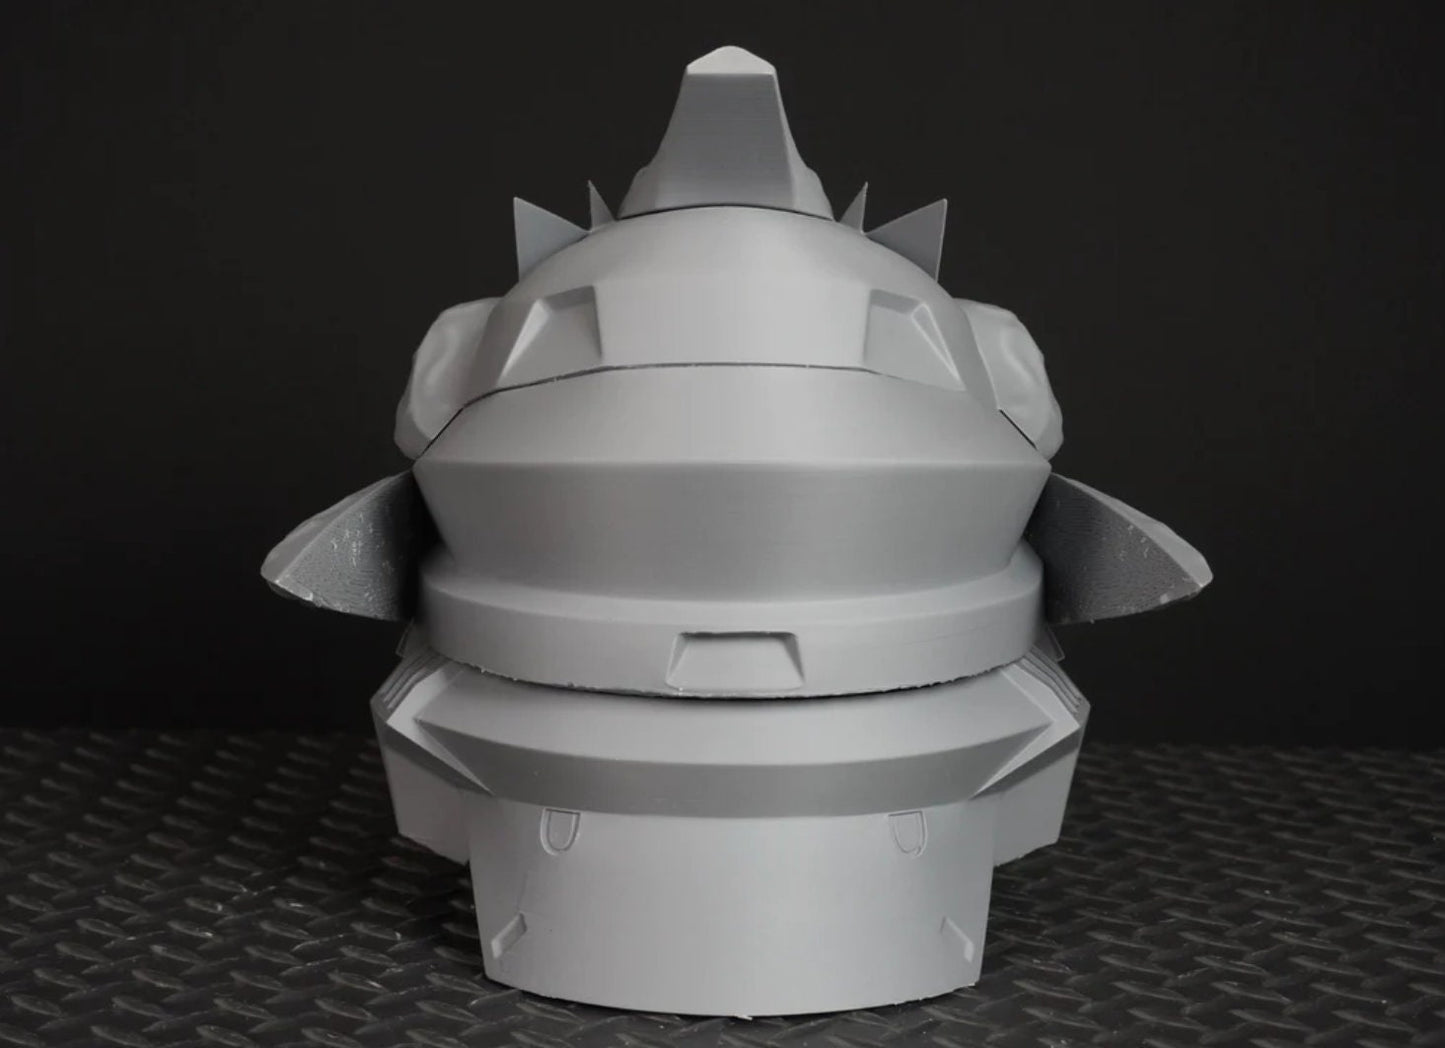 Halo 3 Hayabusa Helmet DIY - 3D Printed Full-Size  - Master Chief's Helmet for Cosplay, Collectors, and Gamers